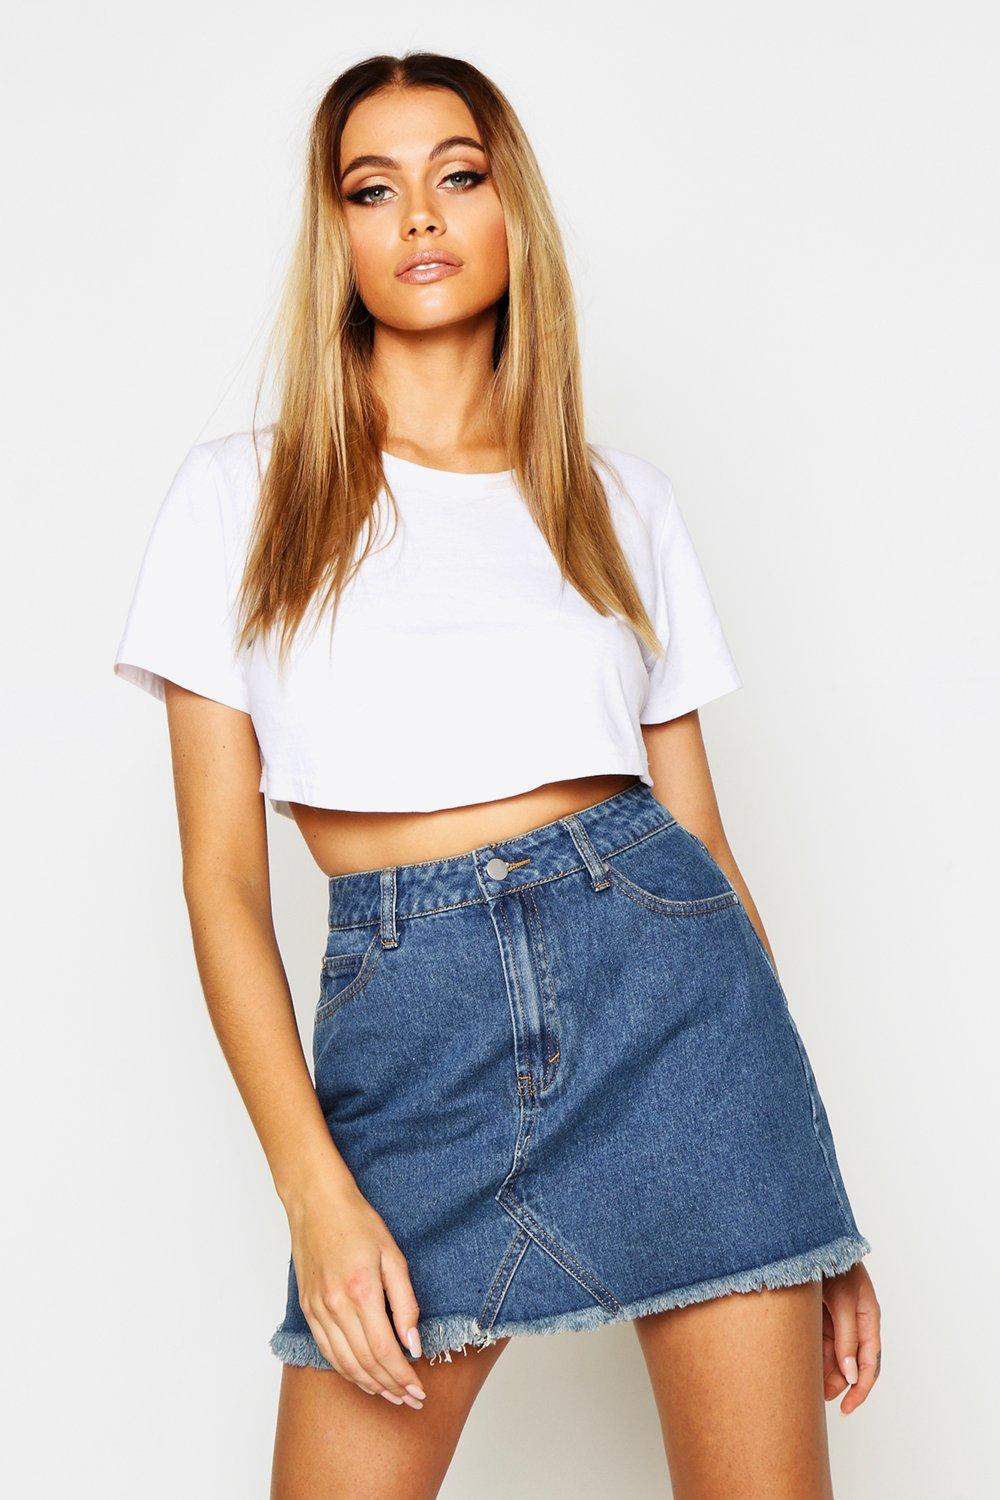 This is one of the cutest denim skirt outfits!